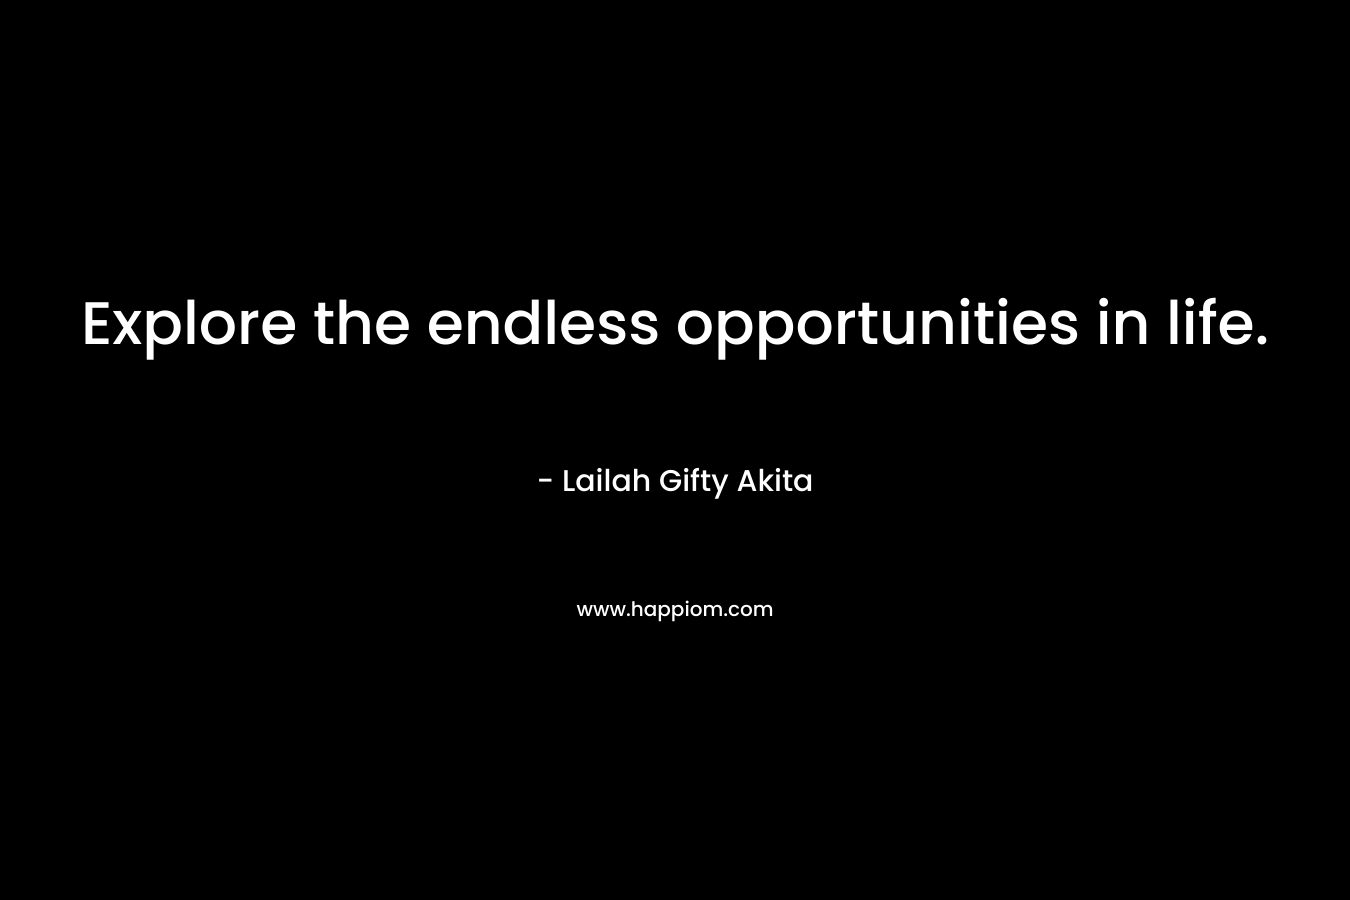 Explore the endless opportunities in life.